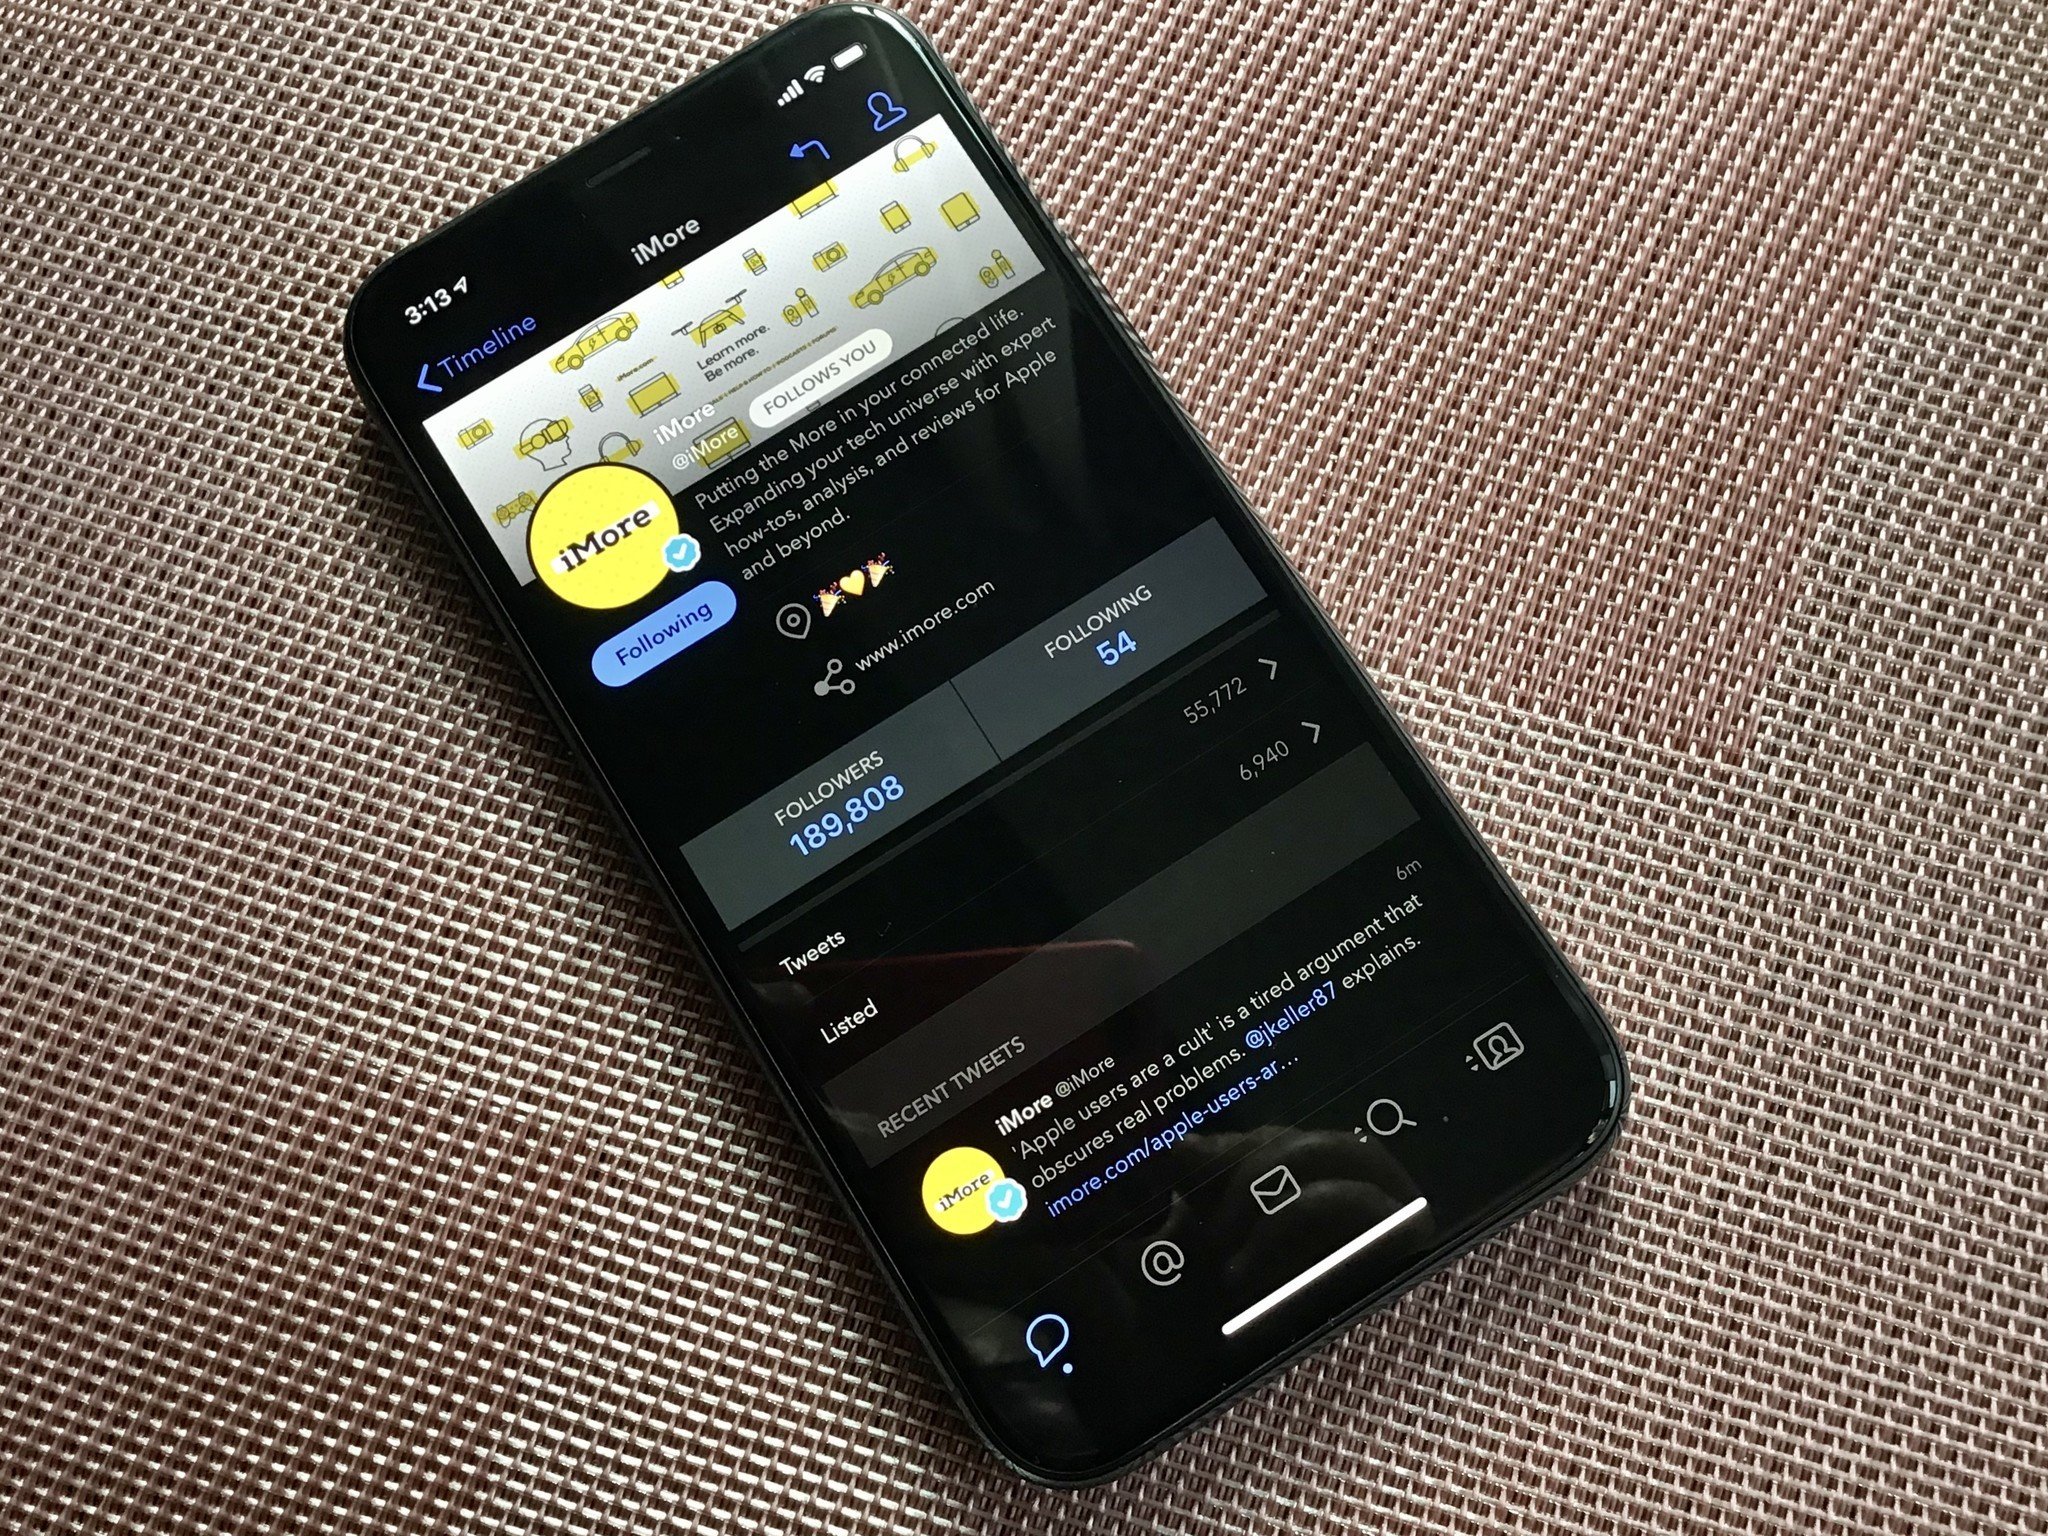 iMore's Twitter in Tweetbot on iPhone 11 Pro